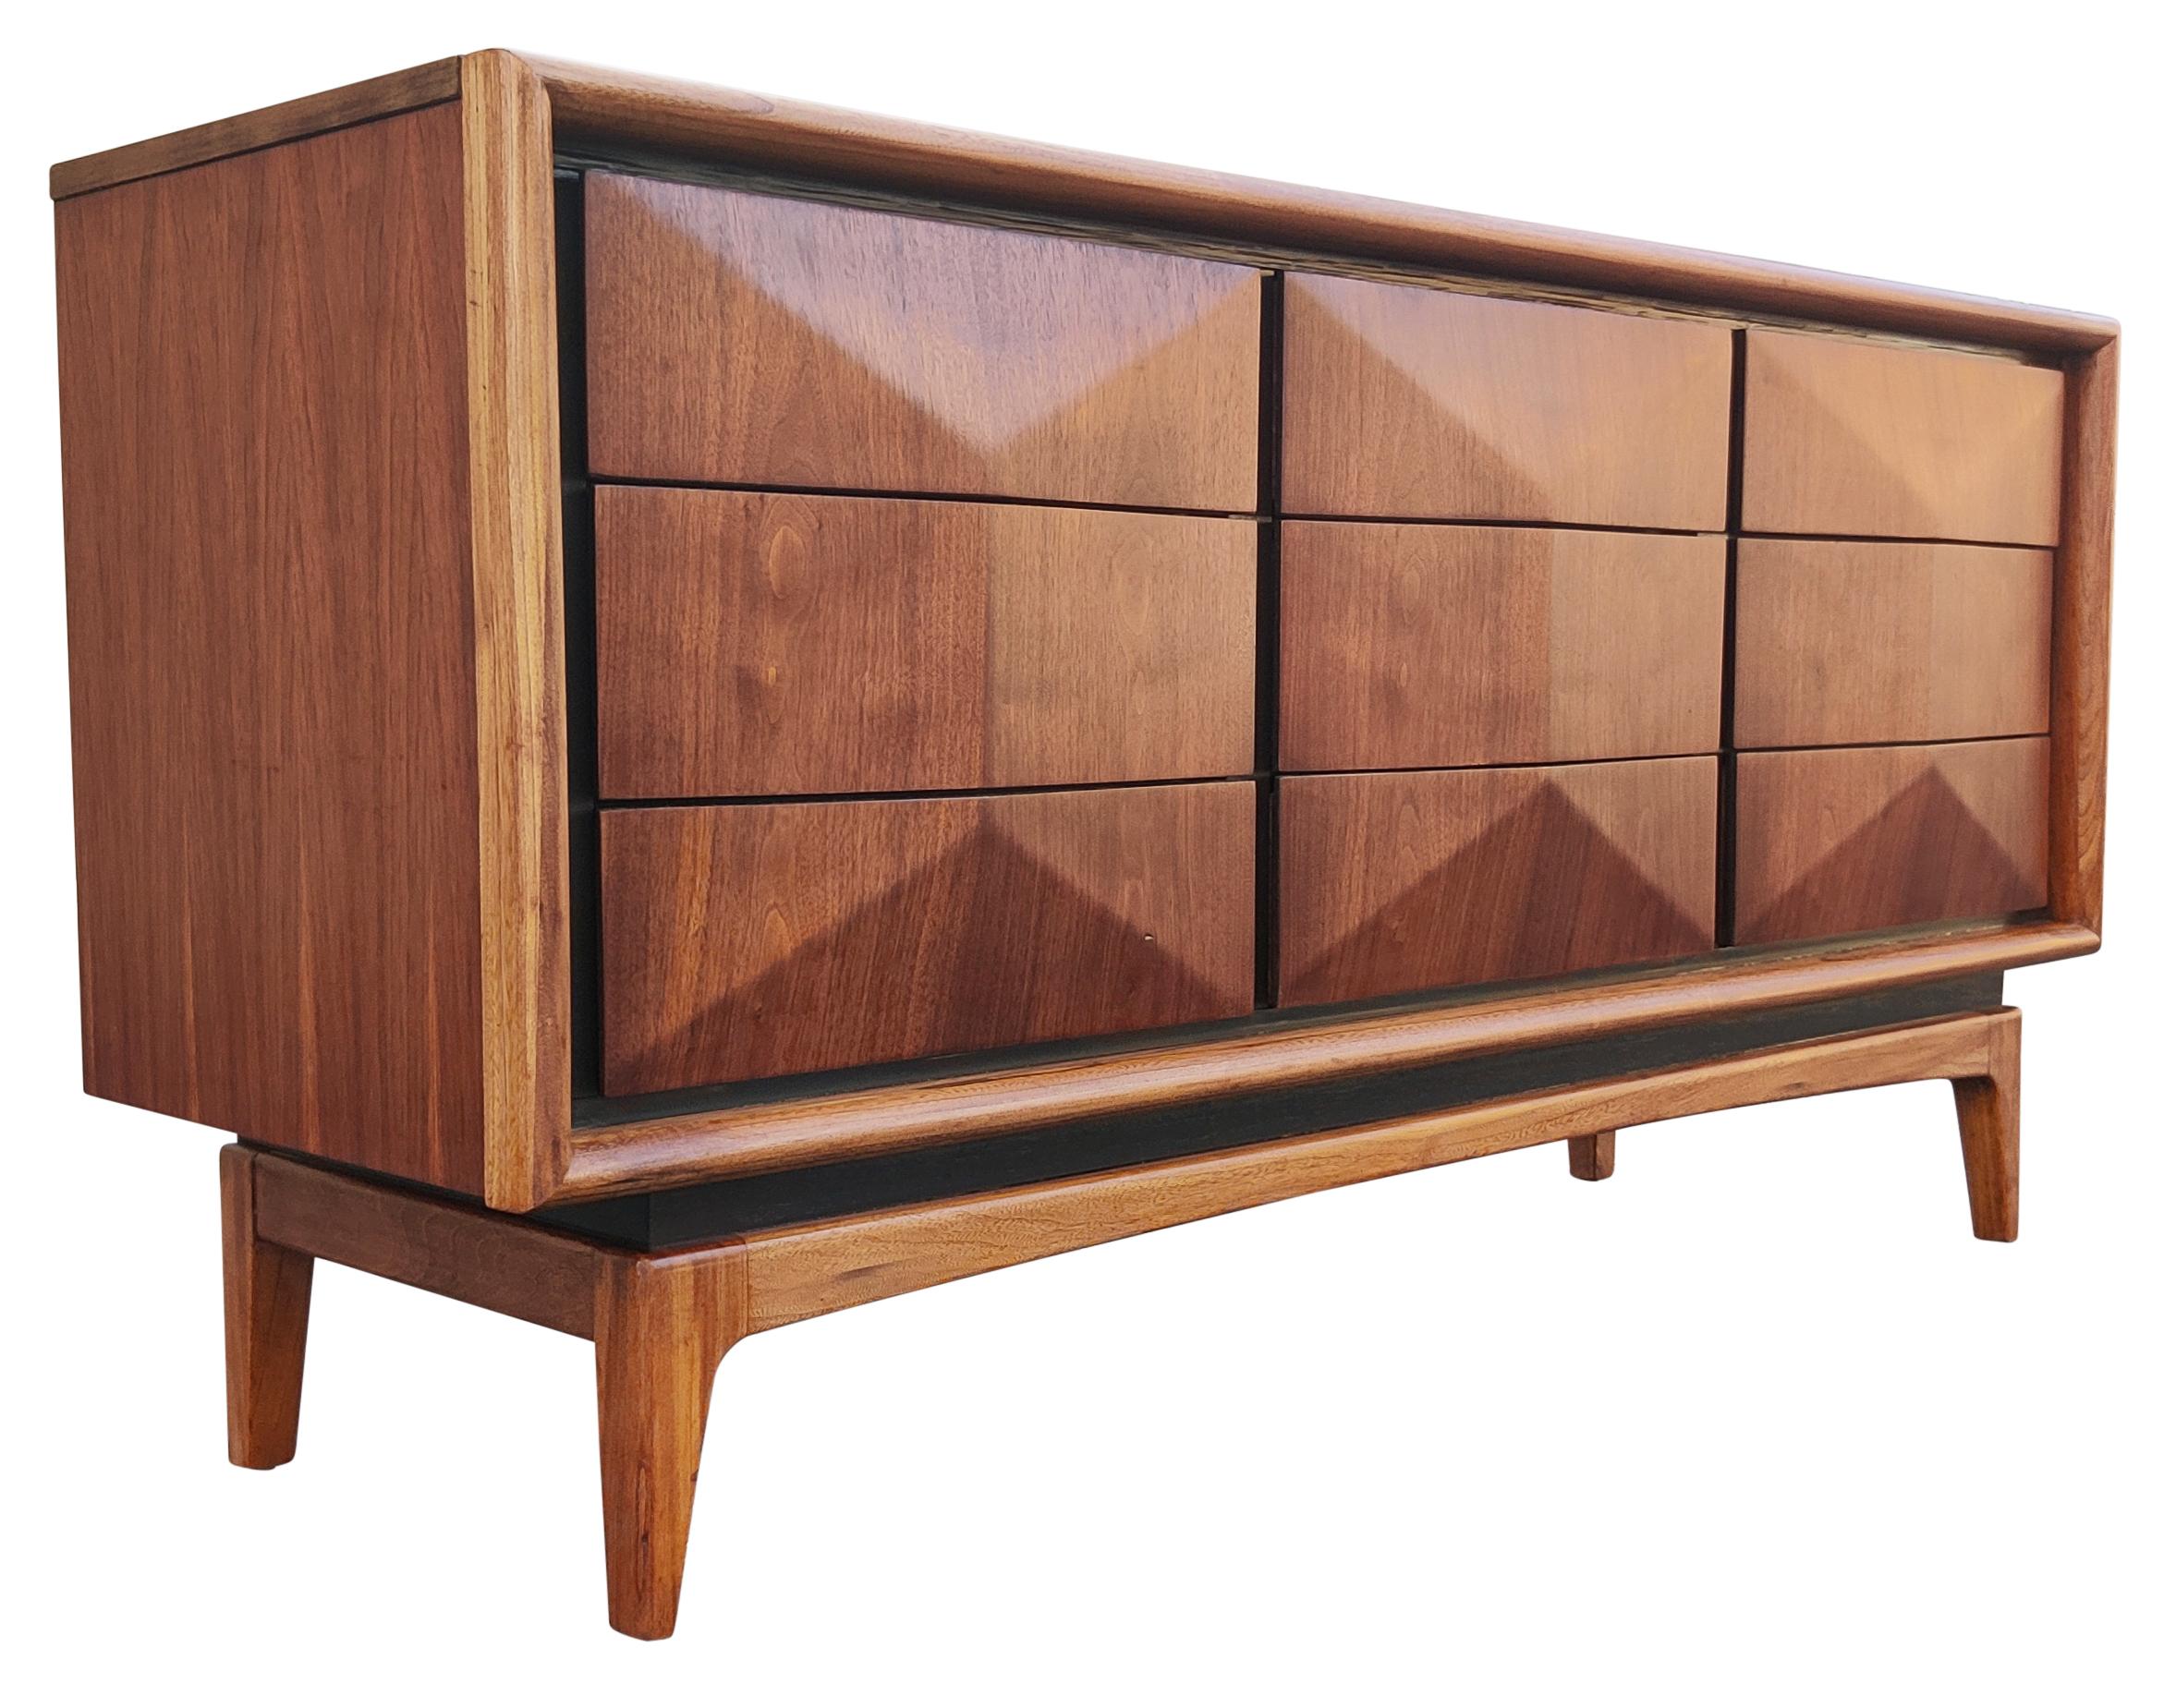 Description: Mid-Century Modern united furniture company vintage circa 1950s nine-drawer triple dresser would work well in the bedroom as originally intended or in the living room re-purposed as an entertainment console. The long, Danish style